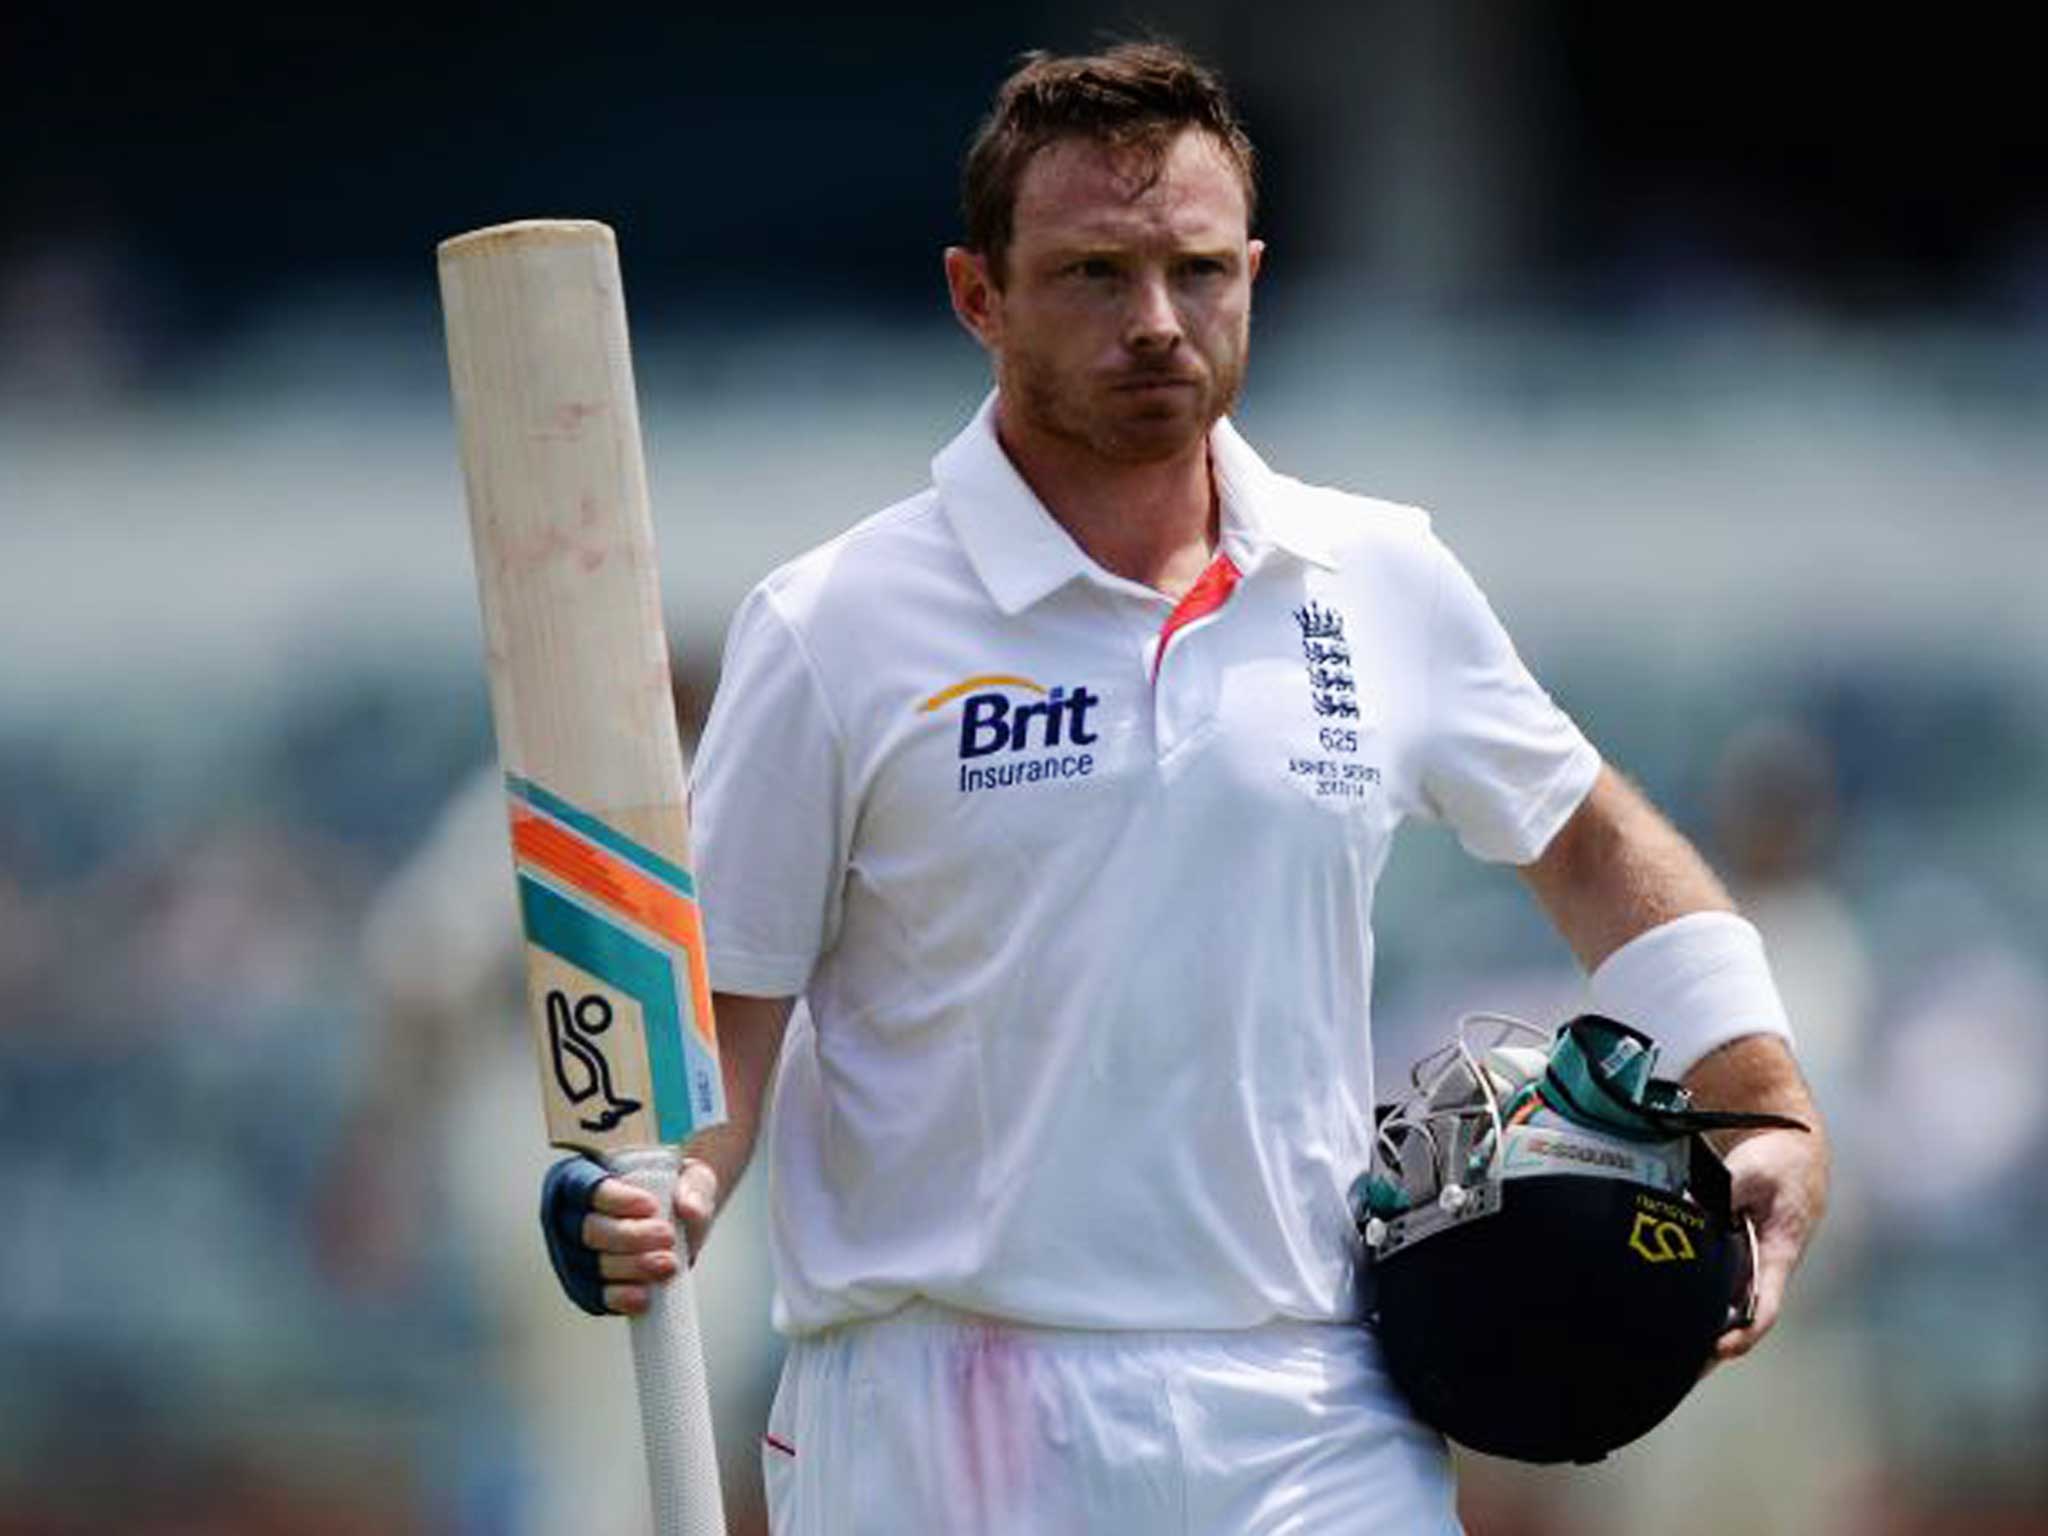 Ian Bell reached his landmark 45th first class hundred with two handsomely driven fours, before deciding to give the others a bash